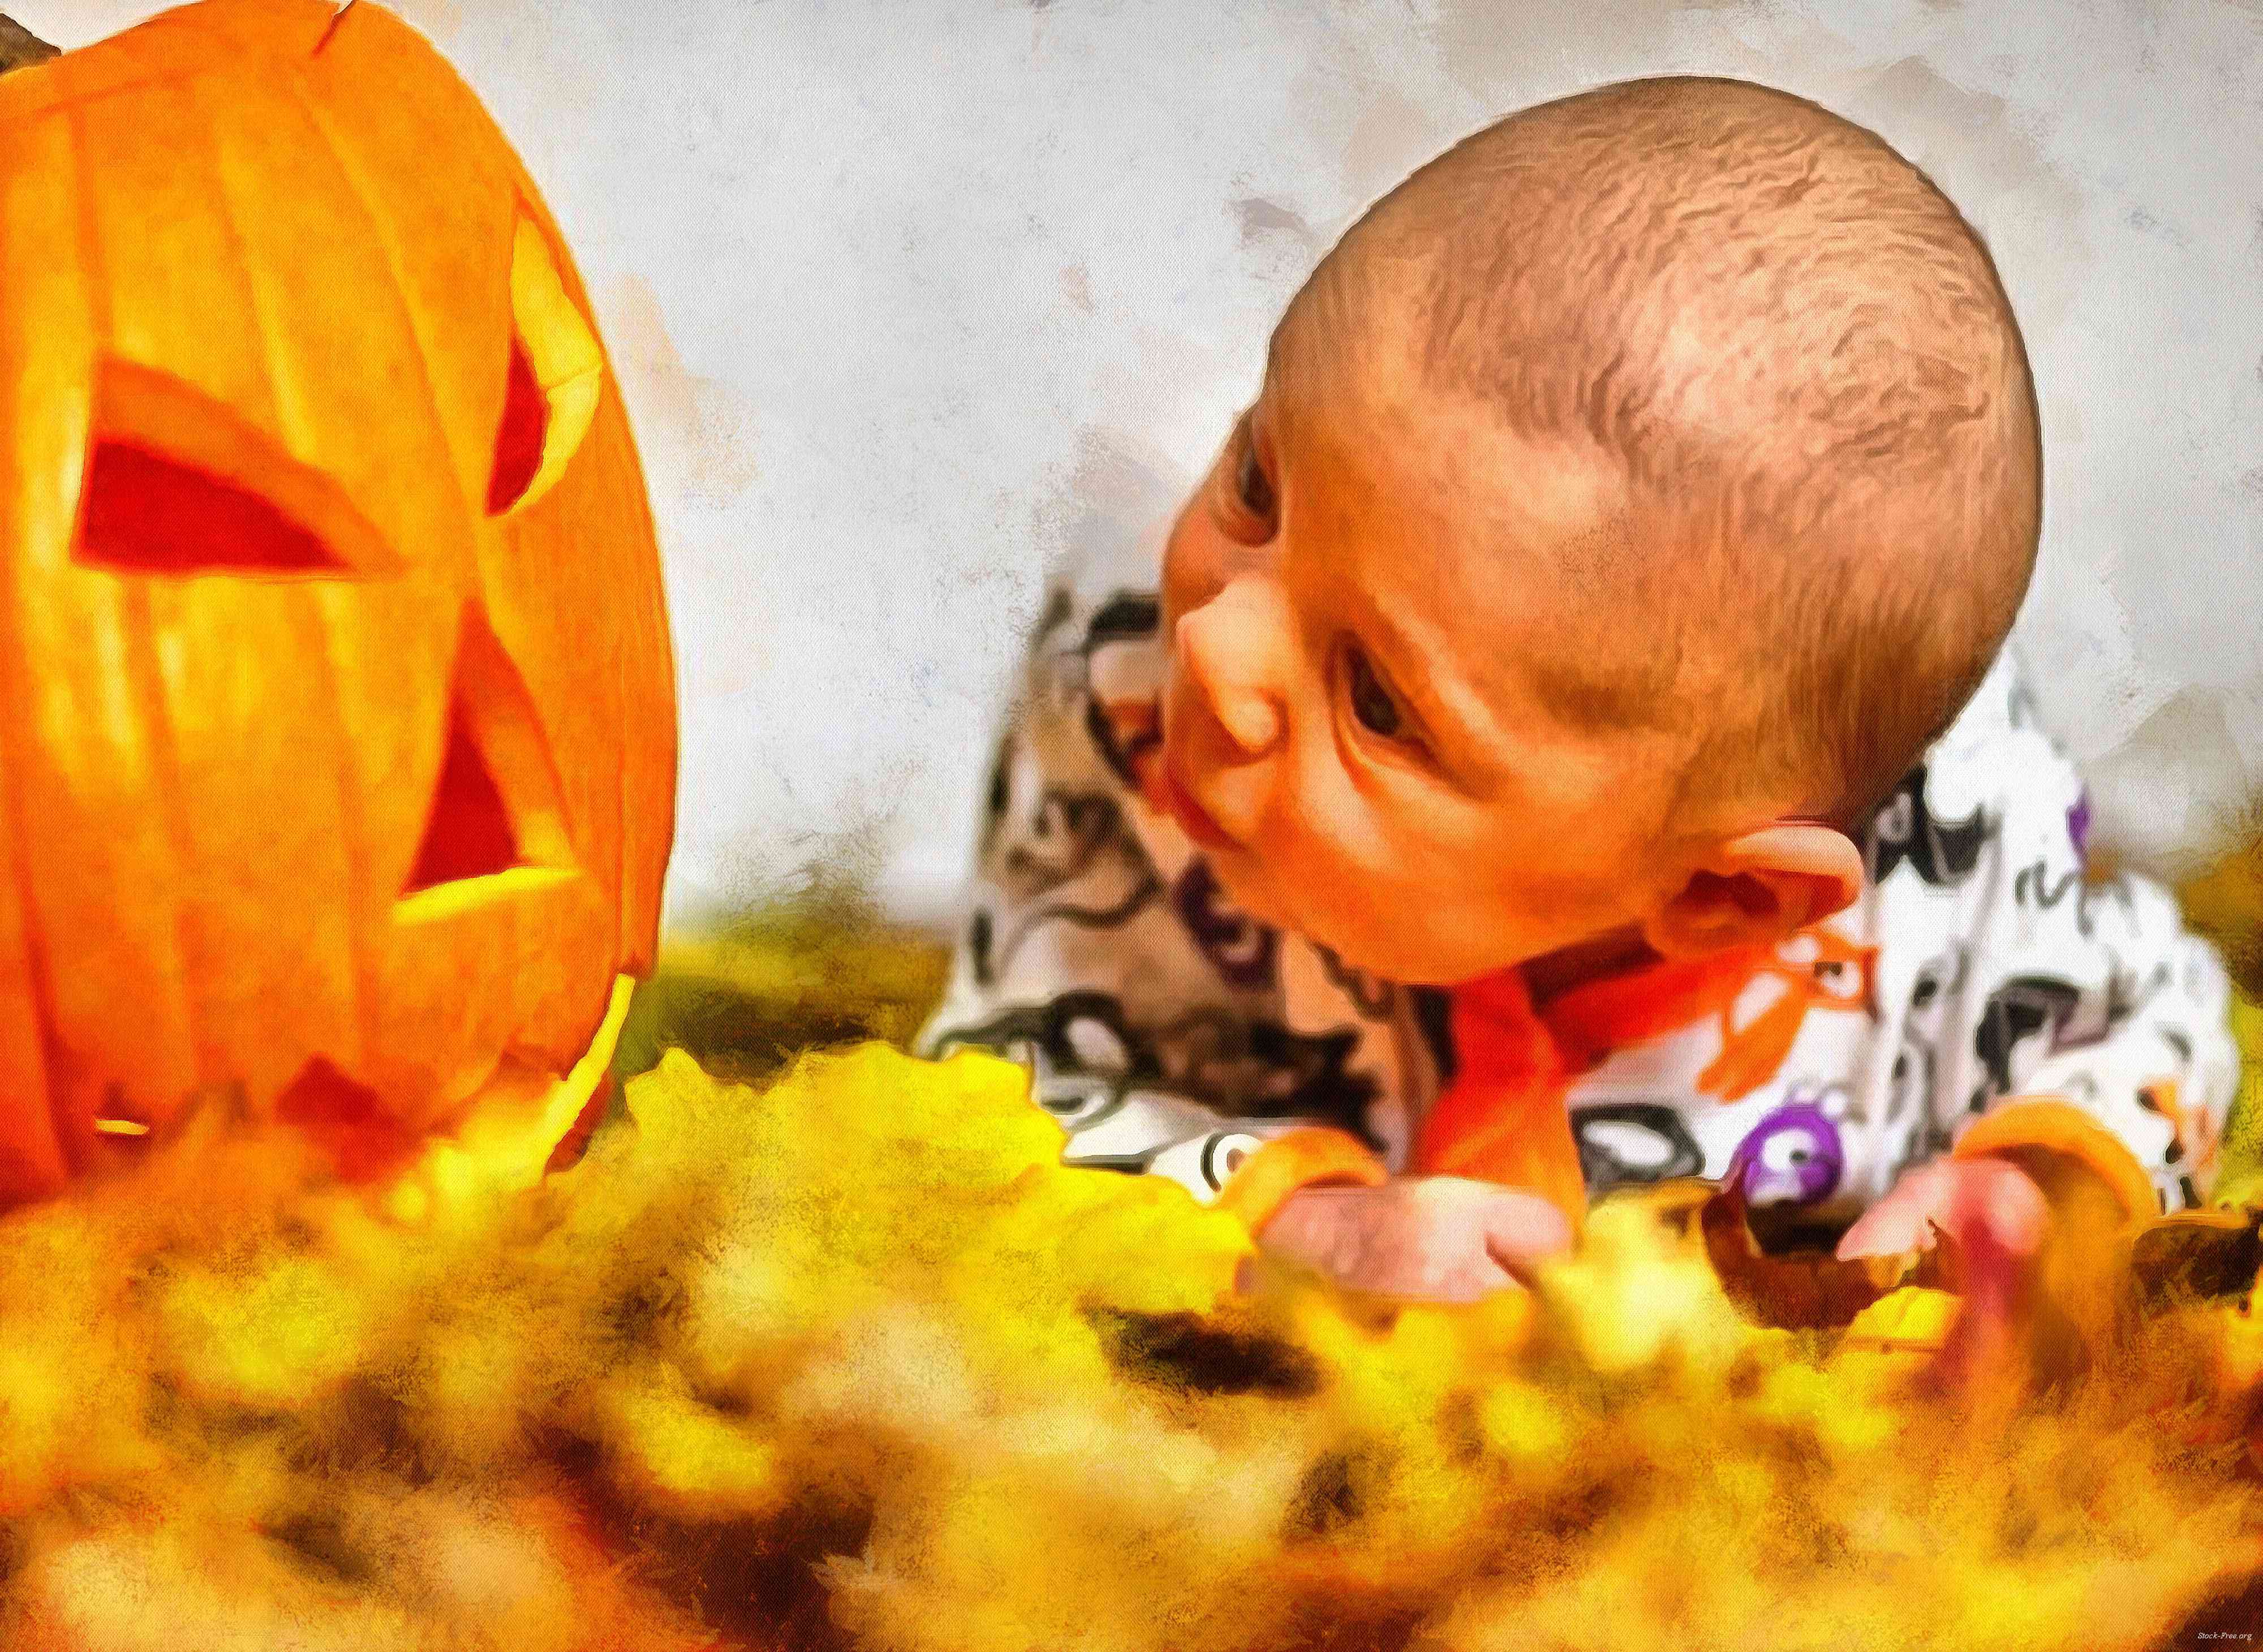  child, baby, toddler, pumpkin, halloween - halloween free image, free images, public domain images, stock free images, download image for free, halloween stock free images!